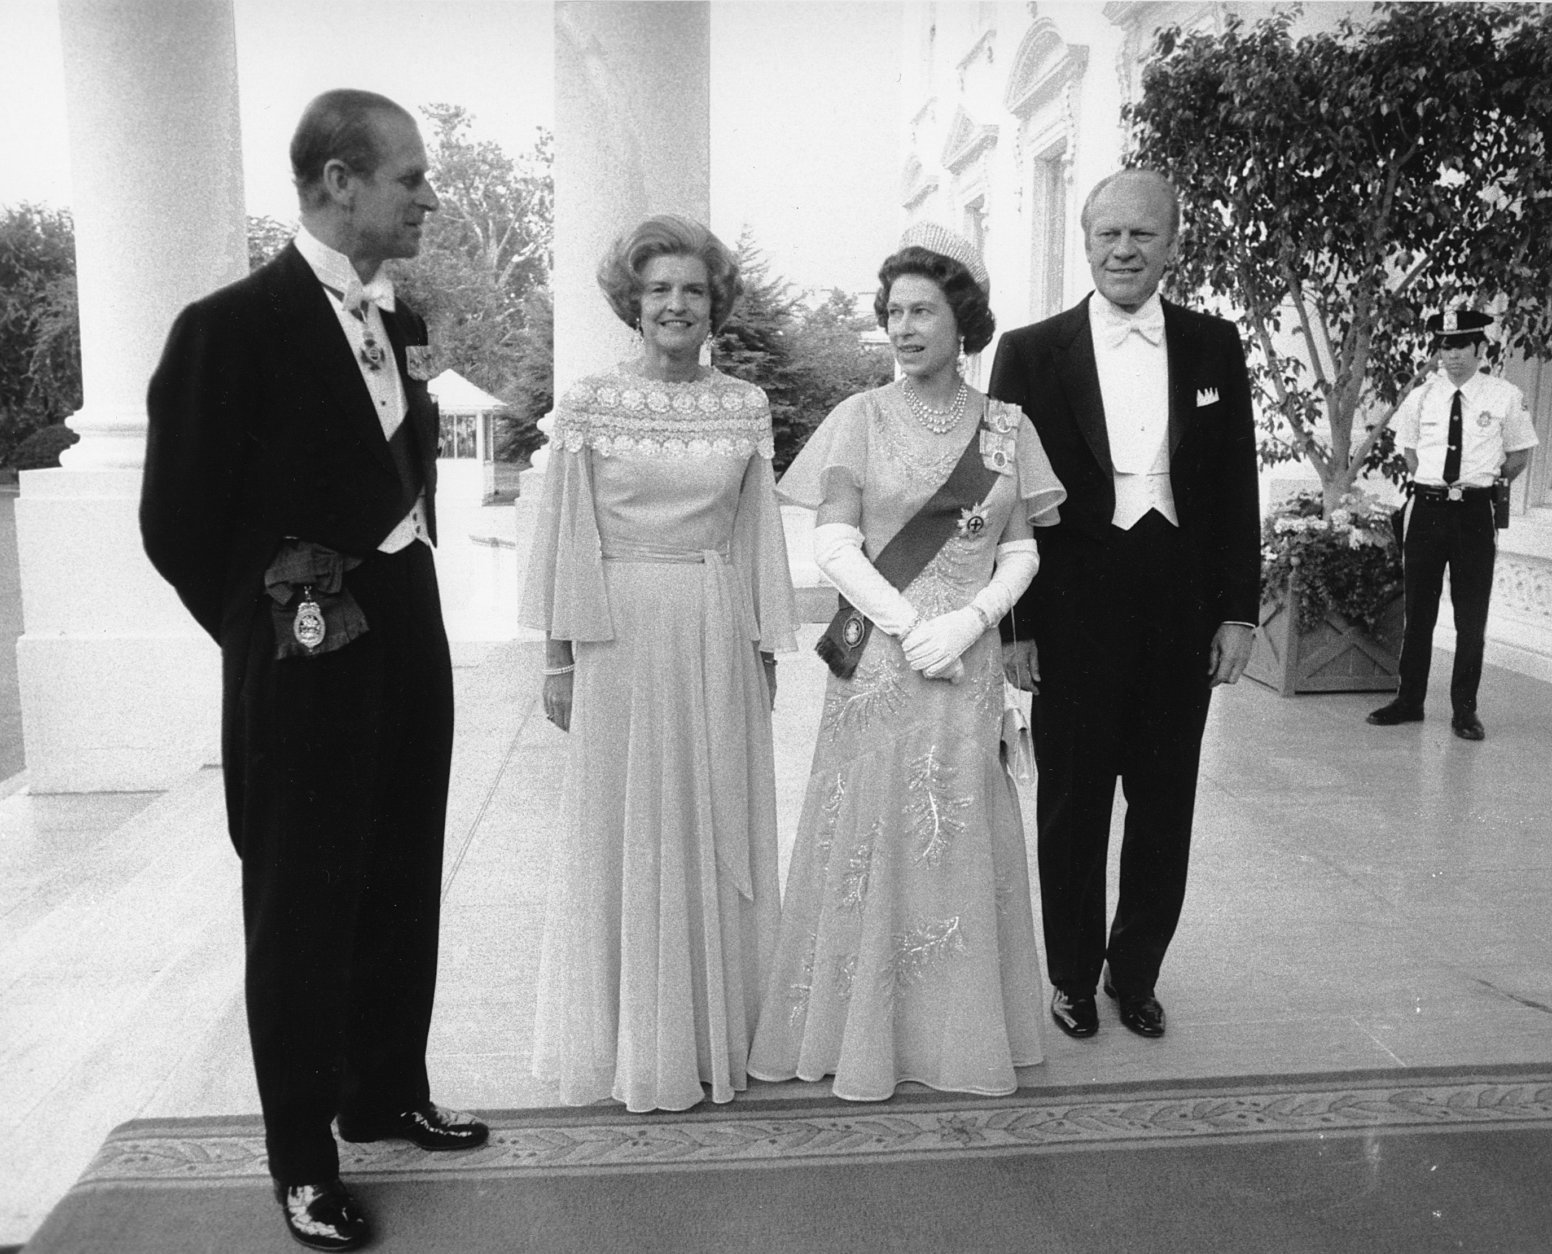 President Ford and first lady Betty Ford pose with Queen Elizabeth II and Prince Philip outside the North Portico of the White House in Washington on July 7, 1976.  The Fords are hosting a state dinner for the Queen of England in the Executive Mansion.  (AP Photo)